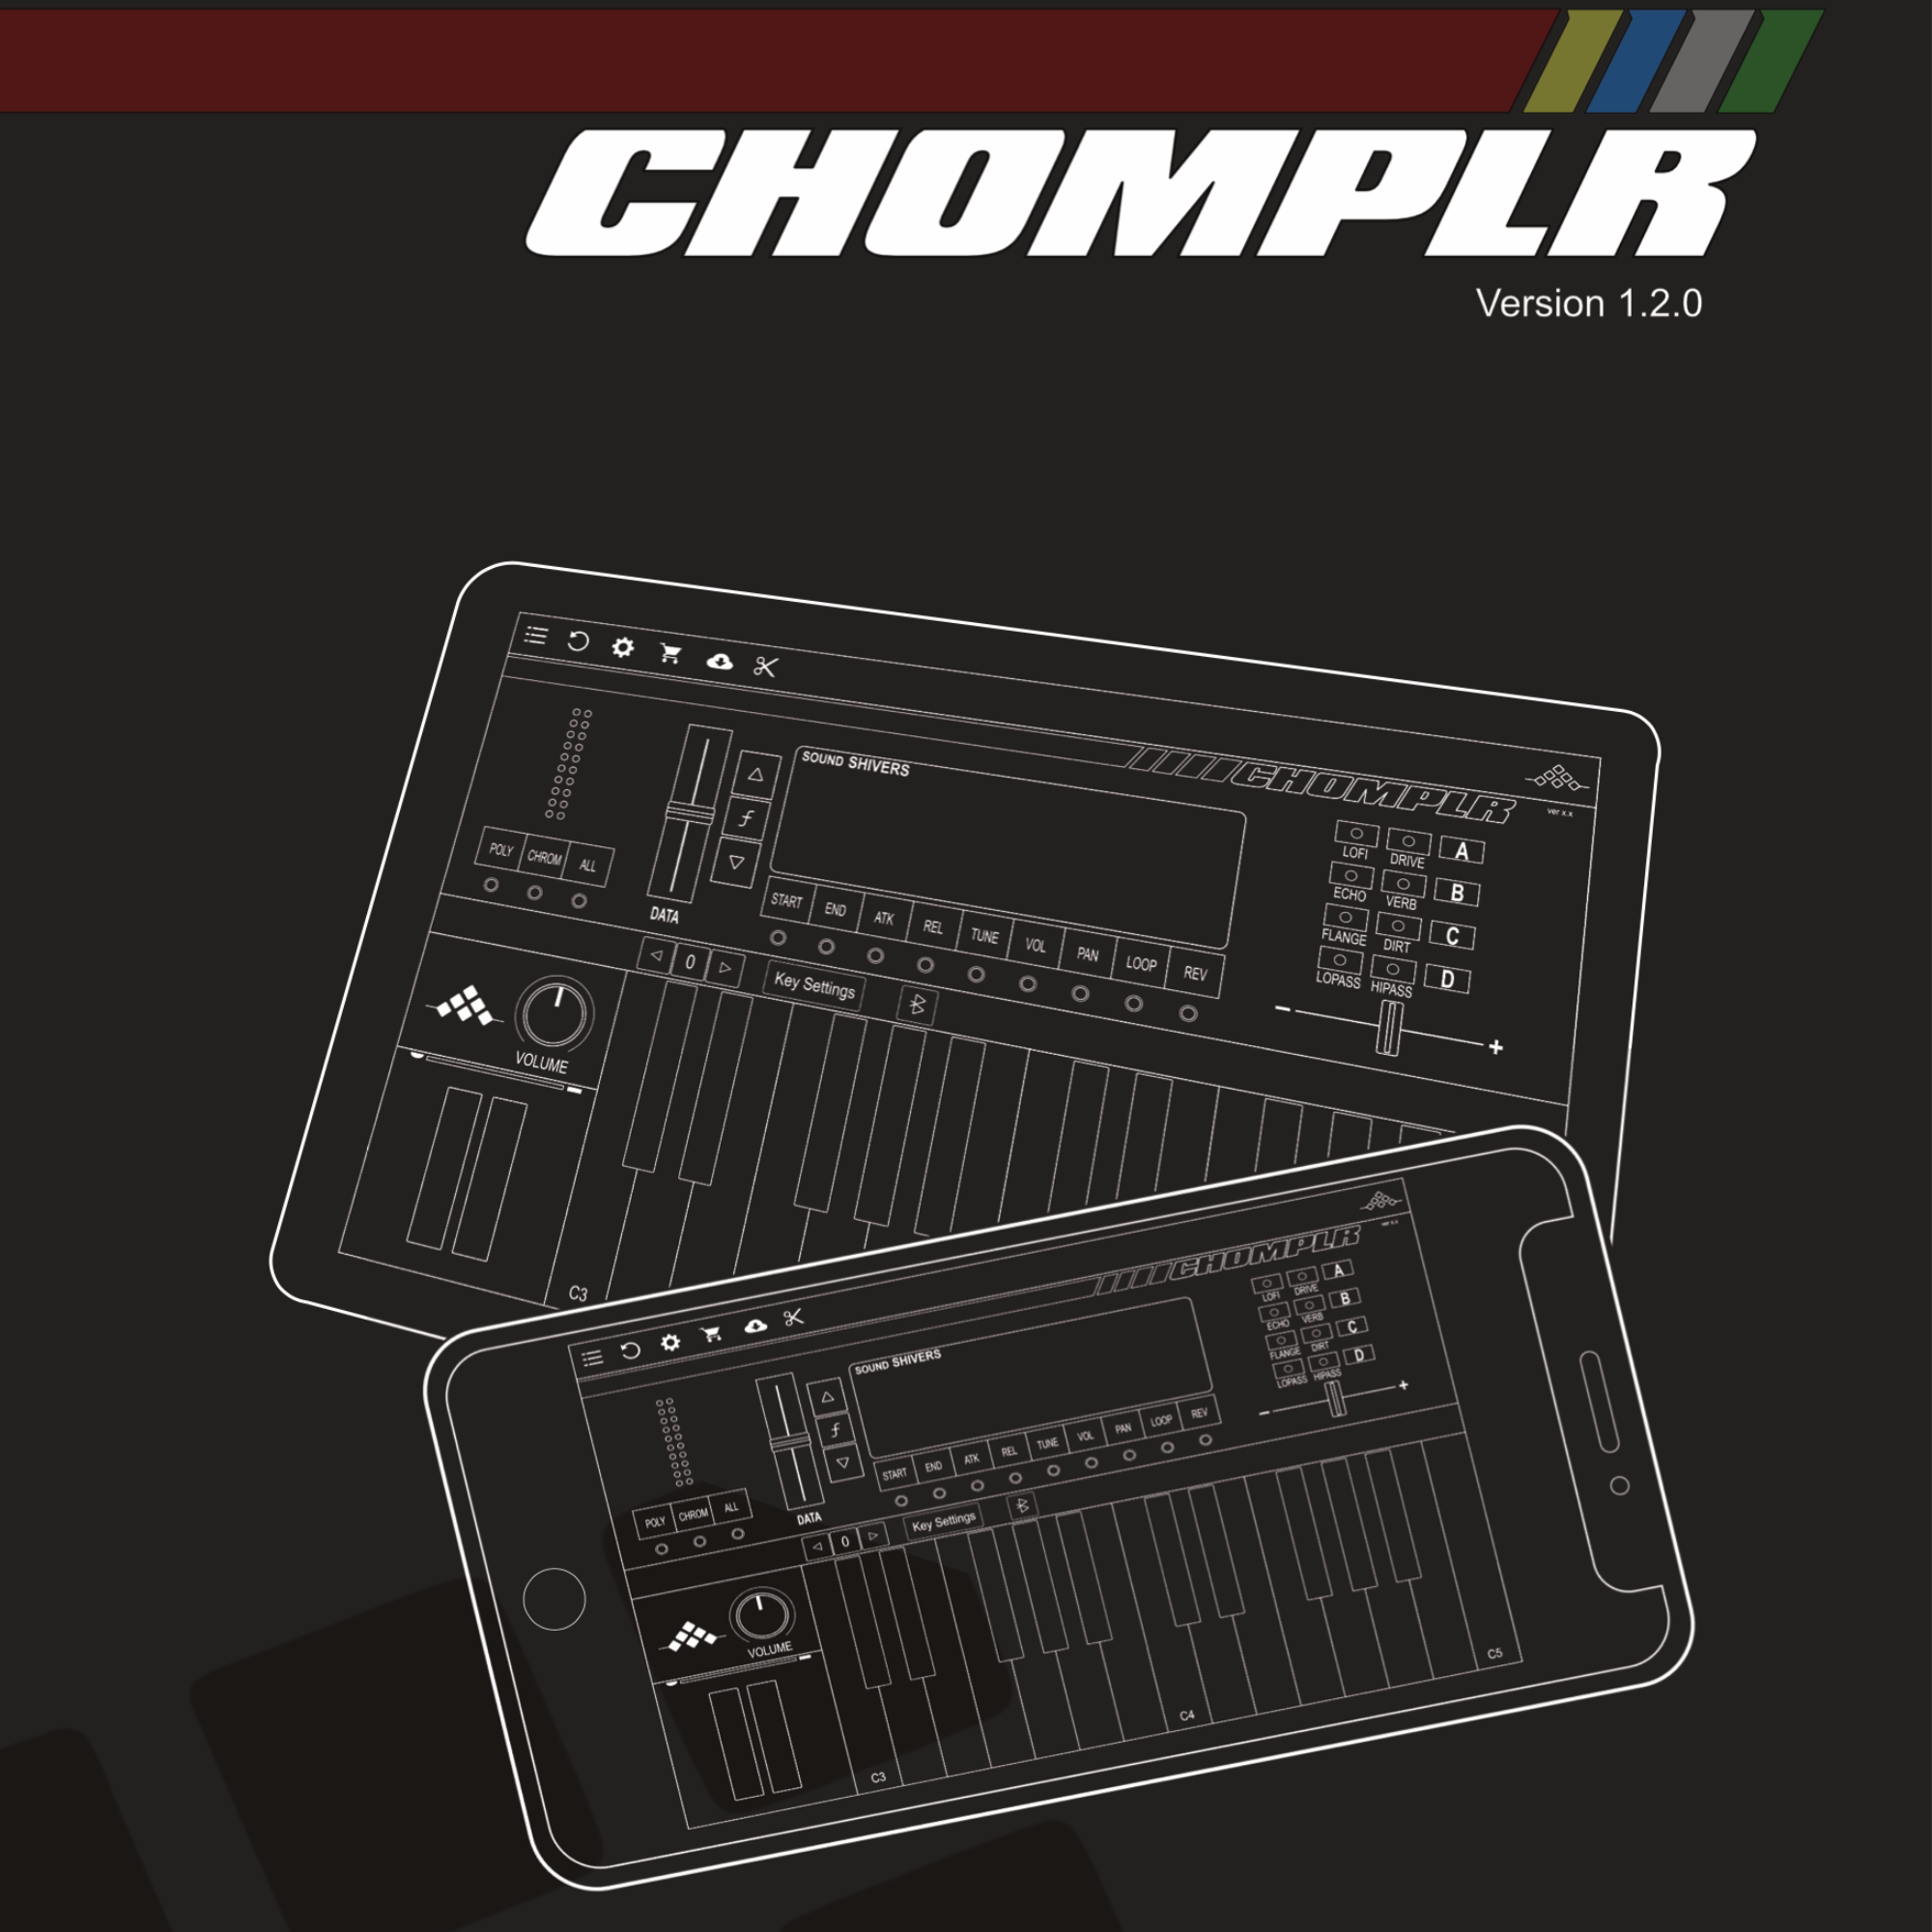 Chomplr Adds Sample Import & iPhone Support in 1.2 Update